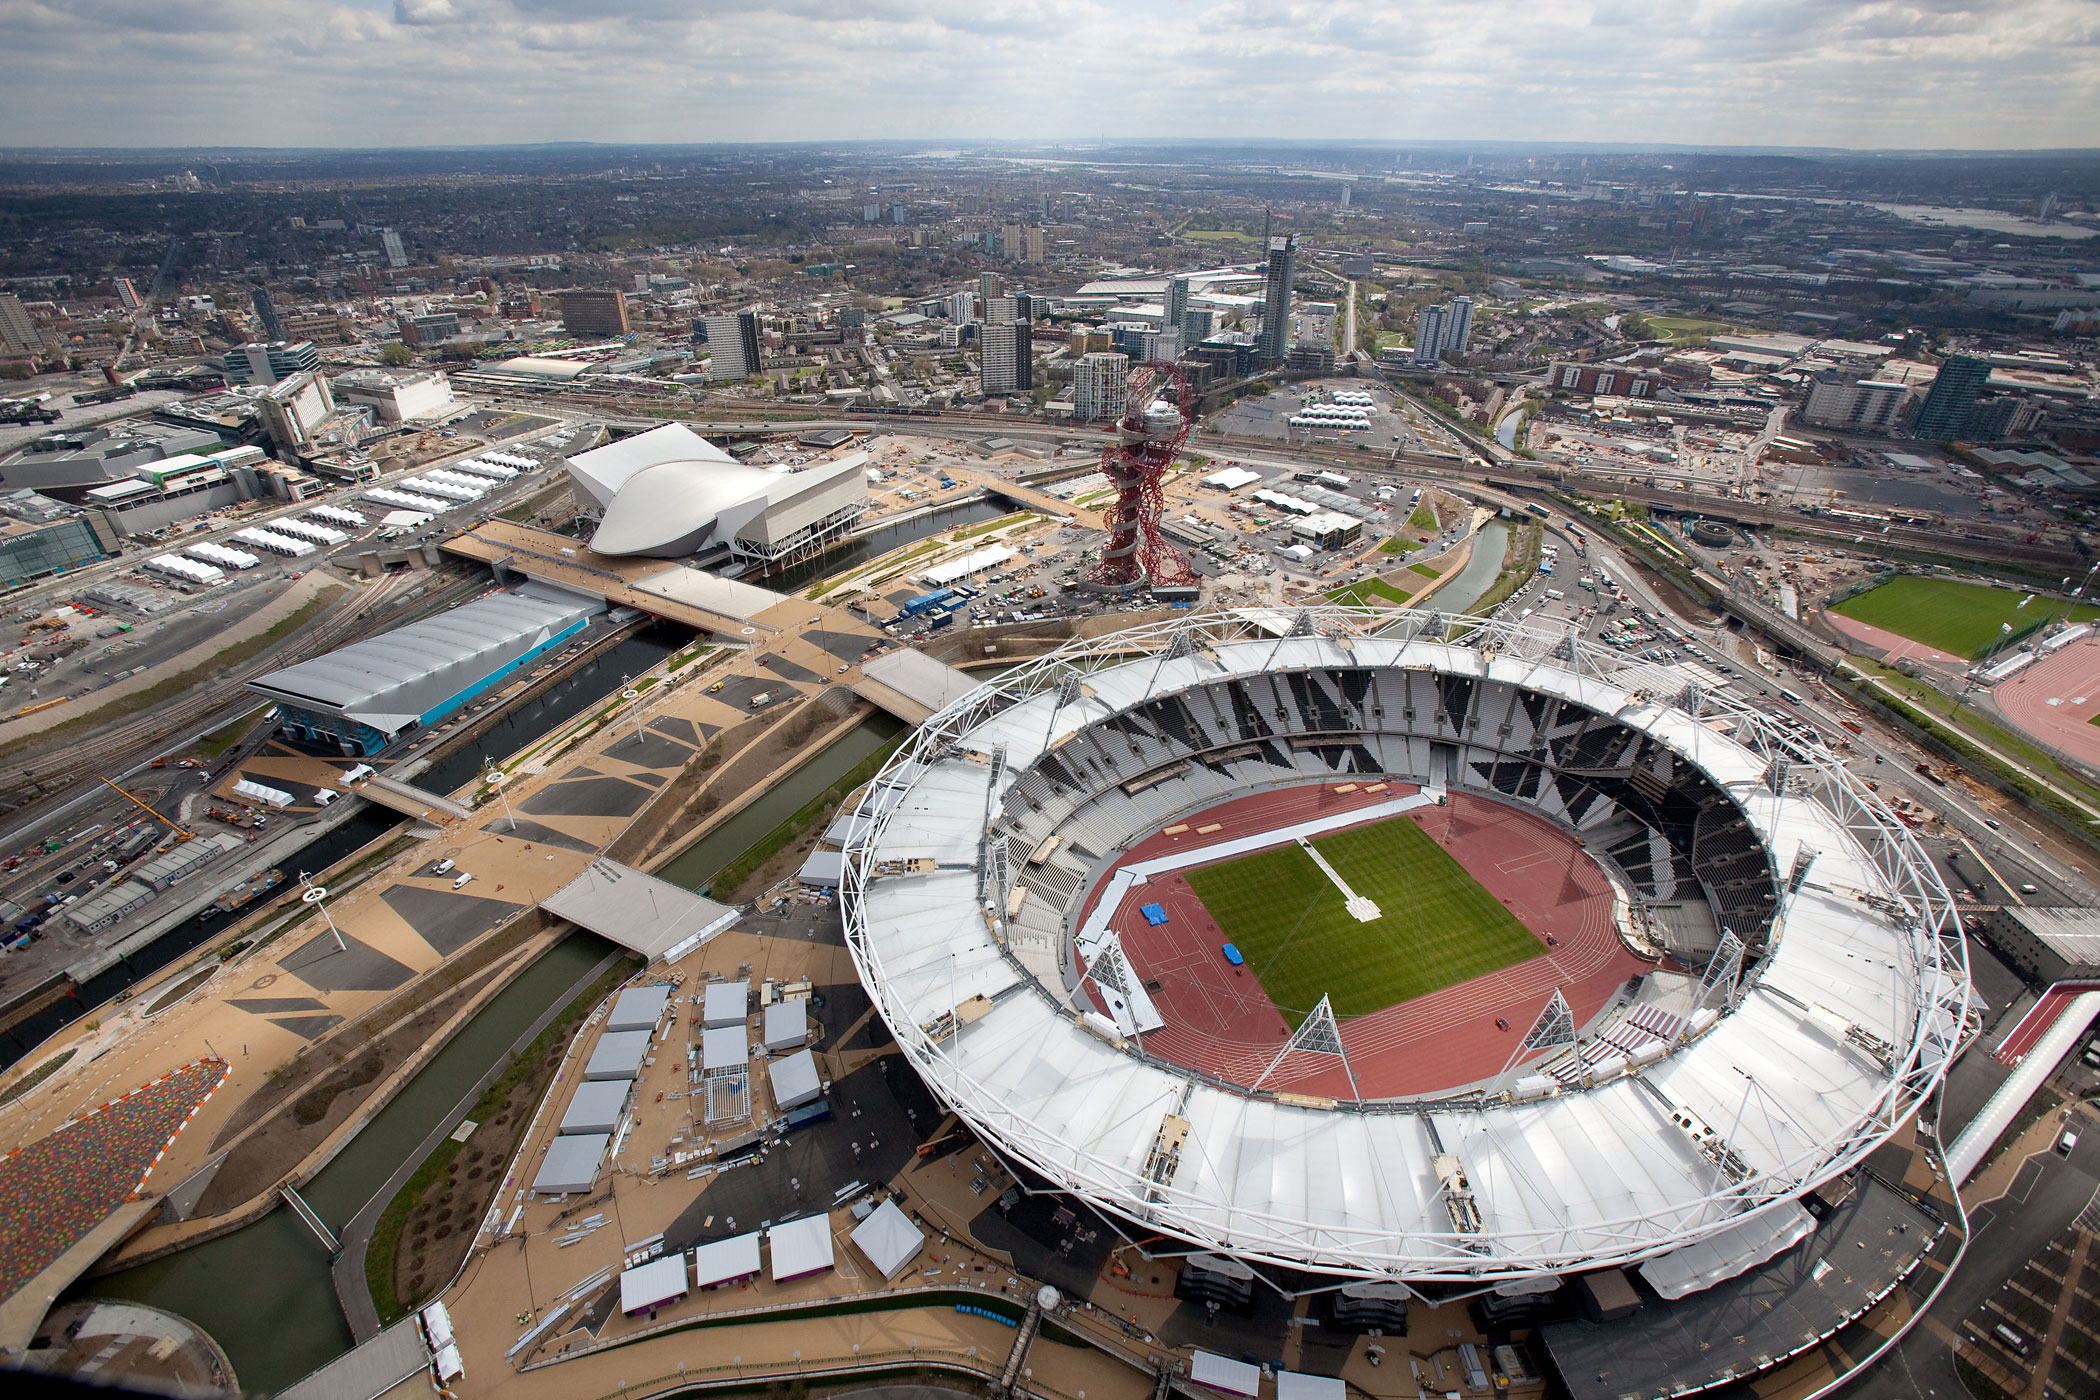 General Views of the Olympic Park